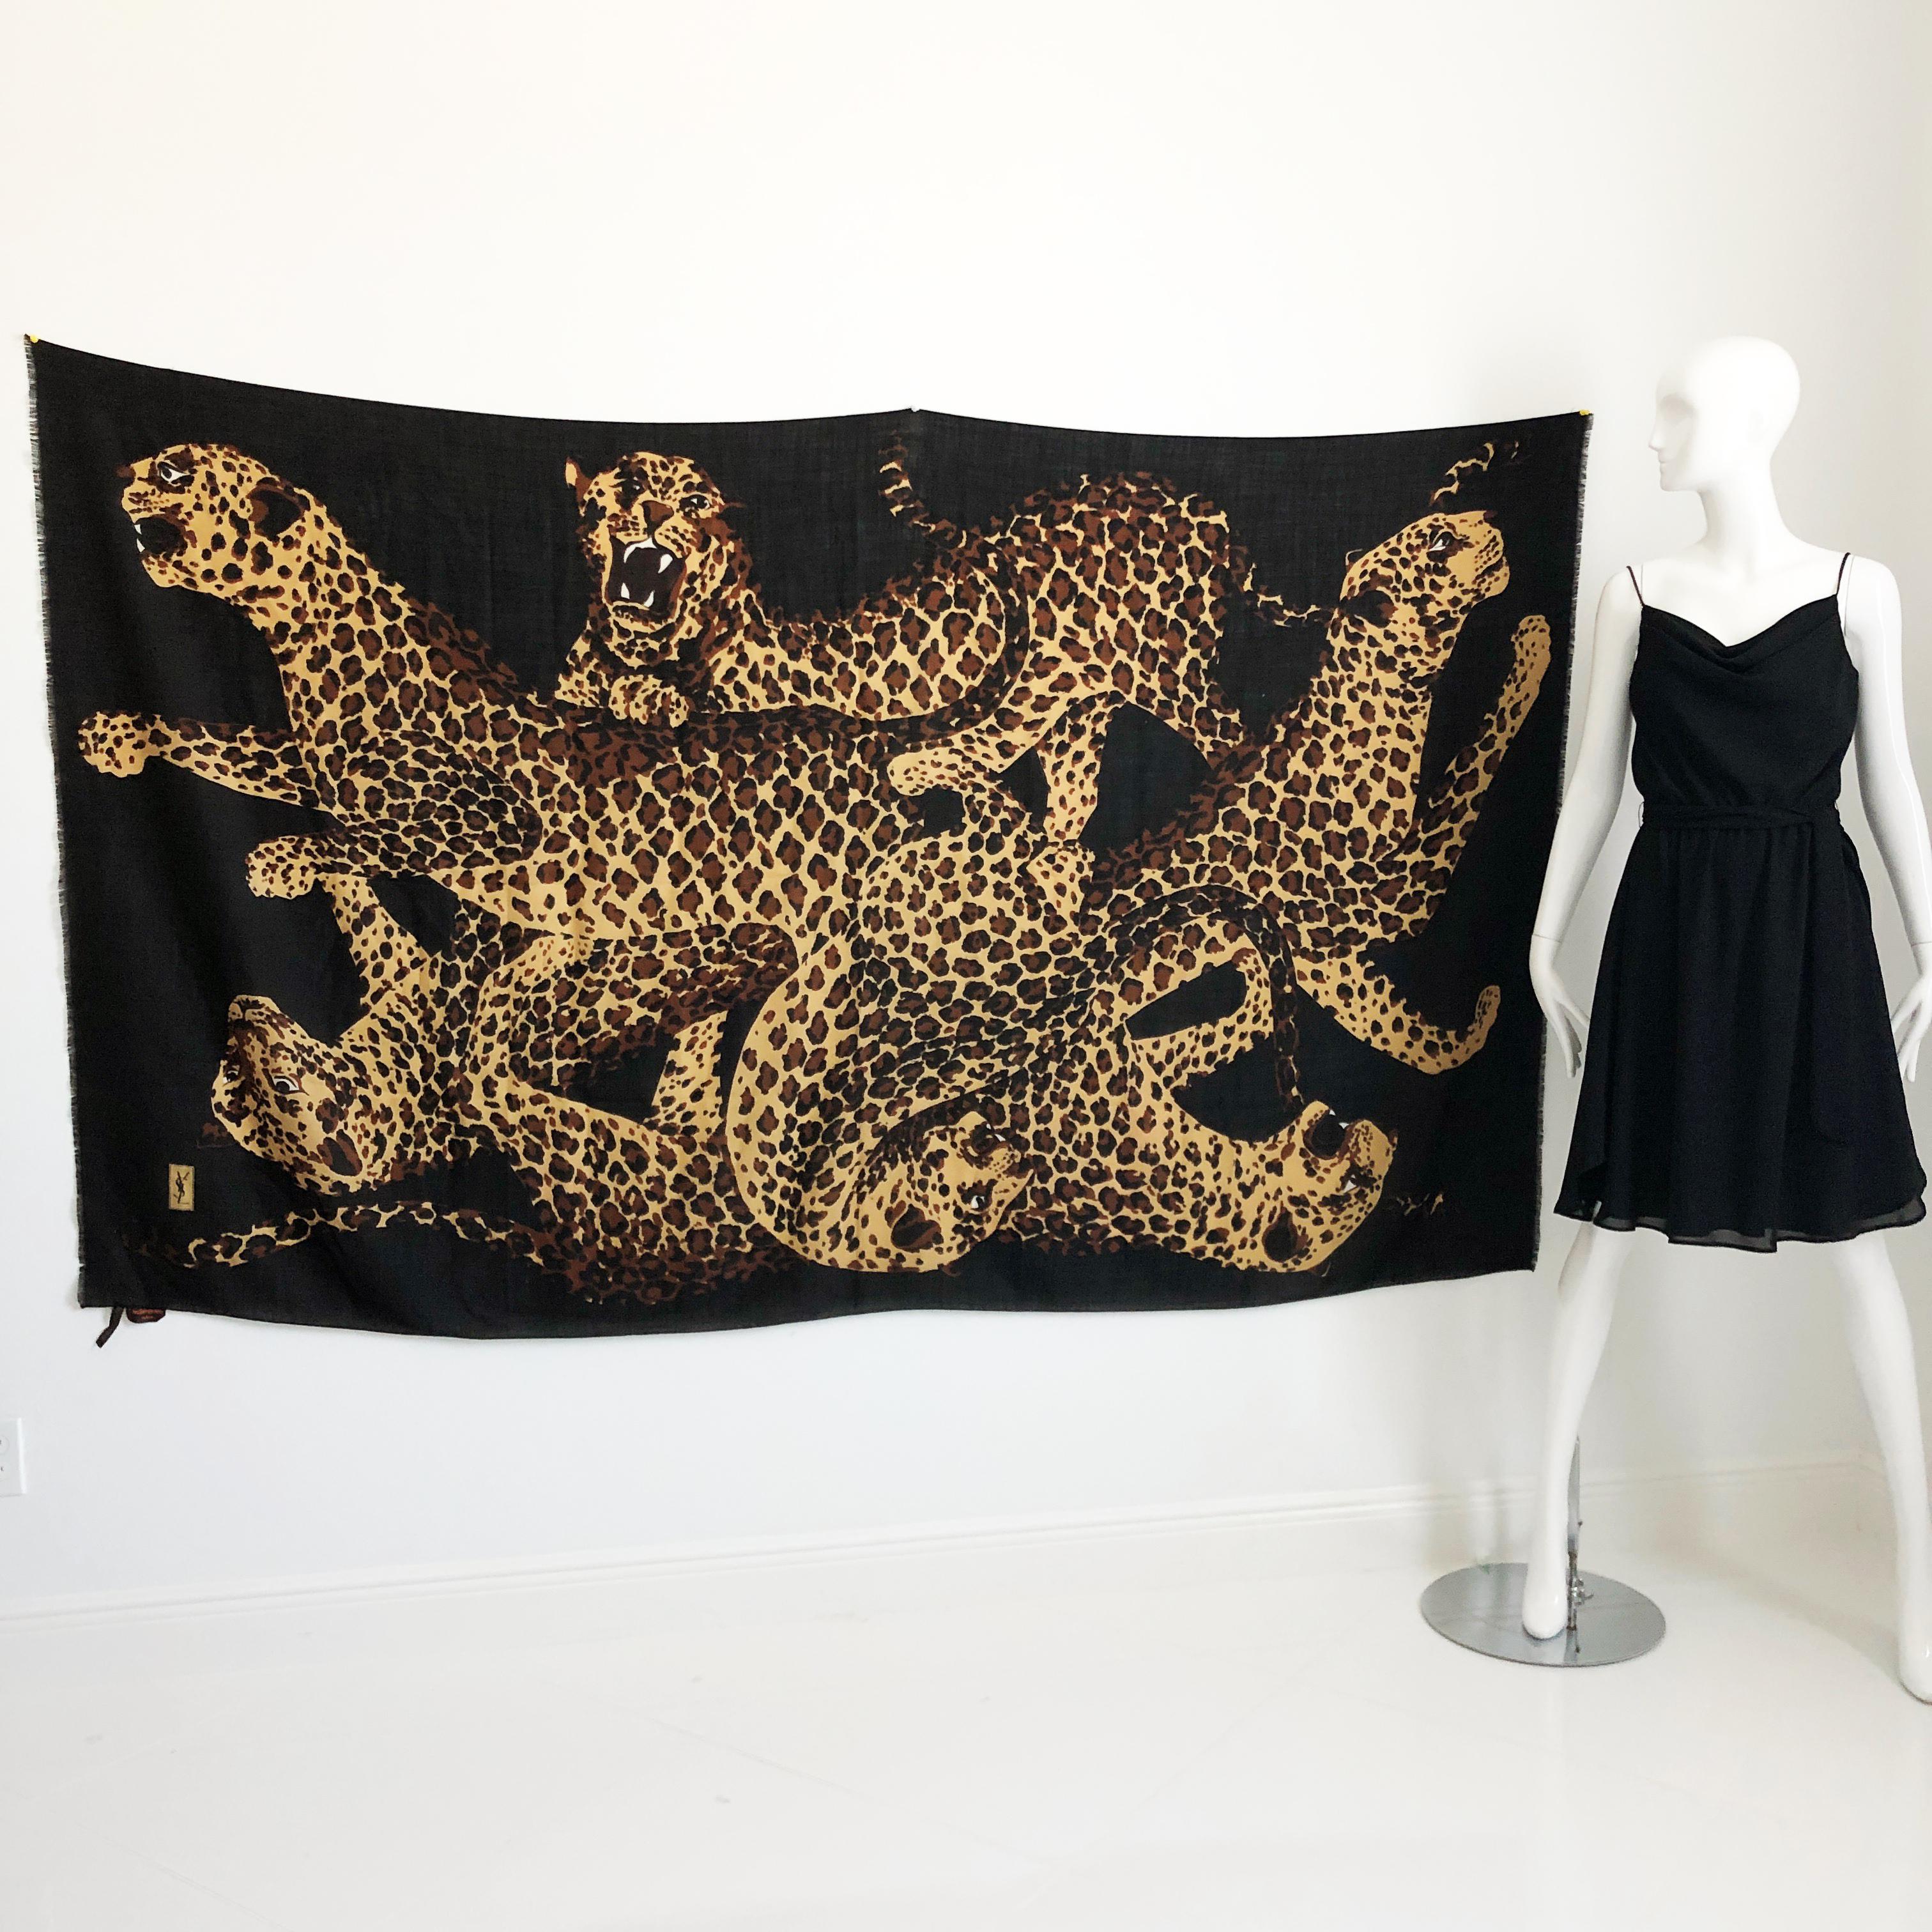 Authentic, preowned and incredibly rare Yves Saint Laurent Massive 84in L x 78in H Leopards shawl or scarf, likely made in the 90s.  

Made from a black wool/silk blend, it features YSL's iconic leopards as a motif throughout.  

Perfect for wear as